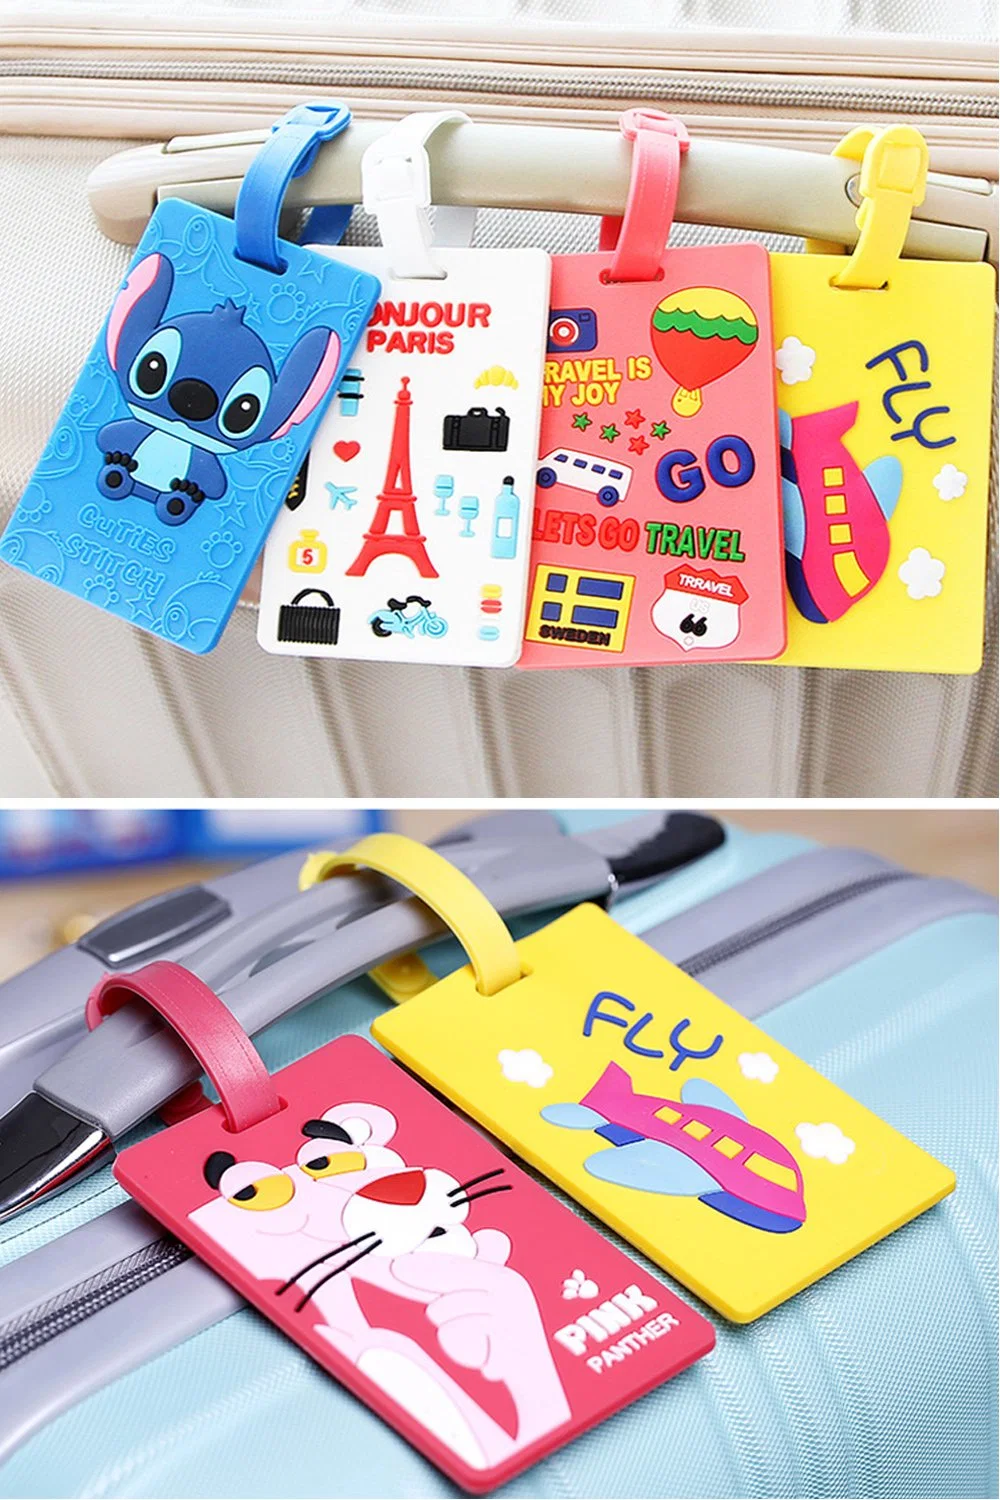 Custom Fashion Airplane Aluminum Passport Holder and Card Soft PVC for Souvenir Gift Leather PU Bag Luggage Tag